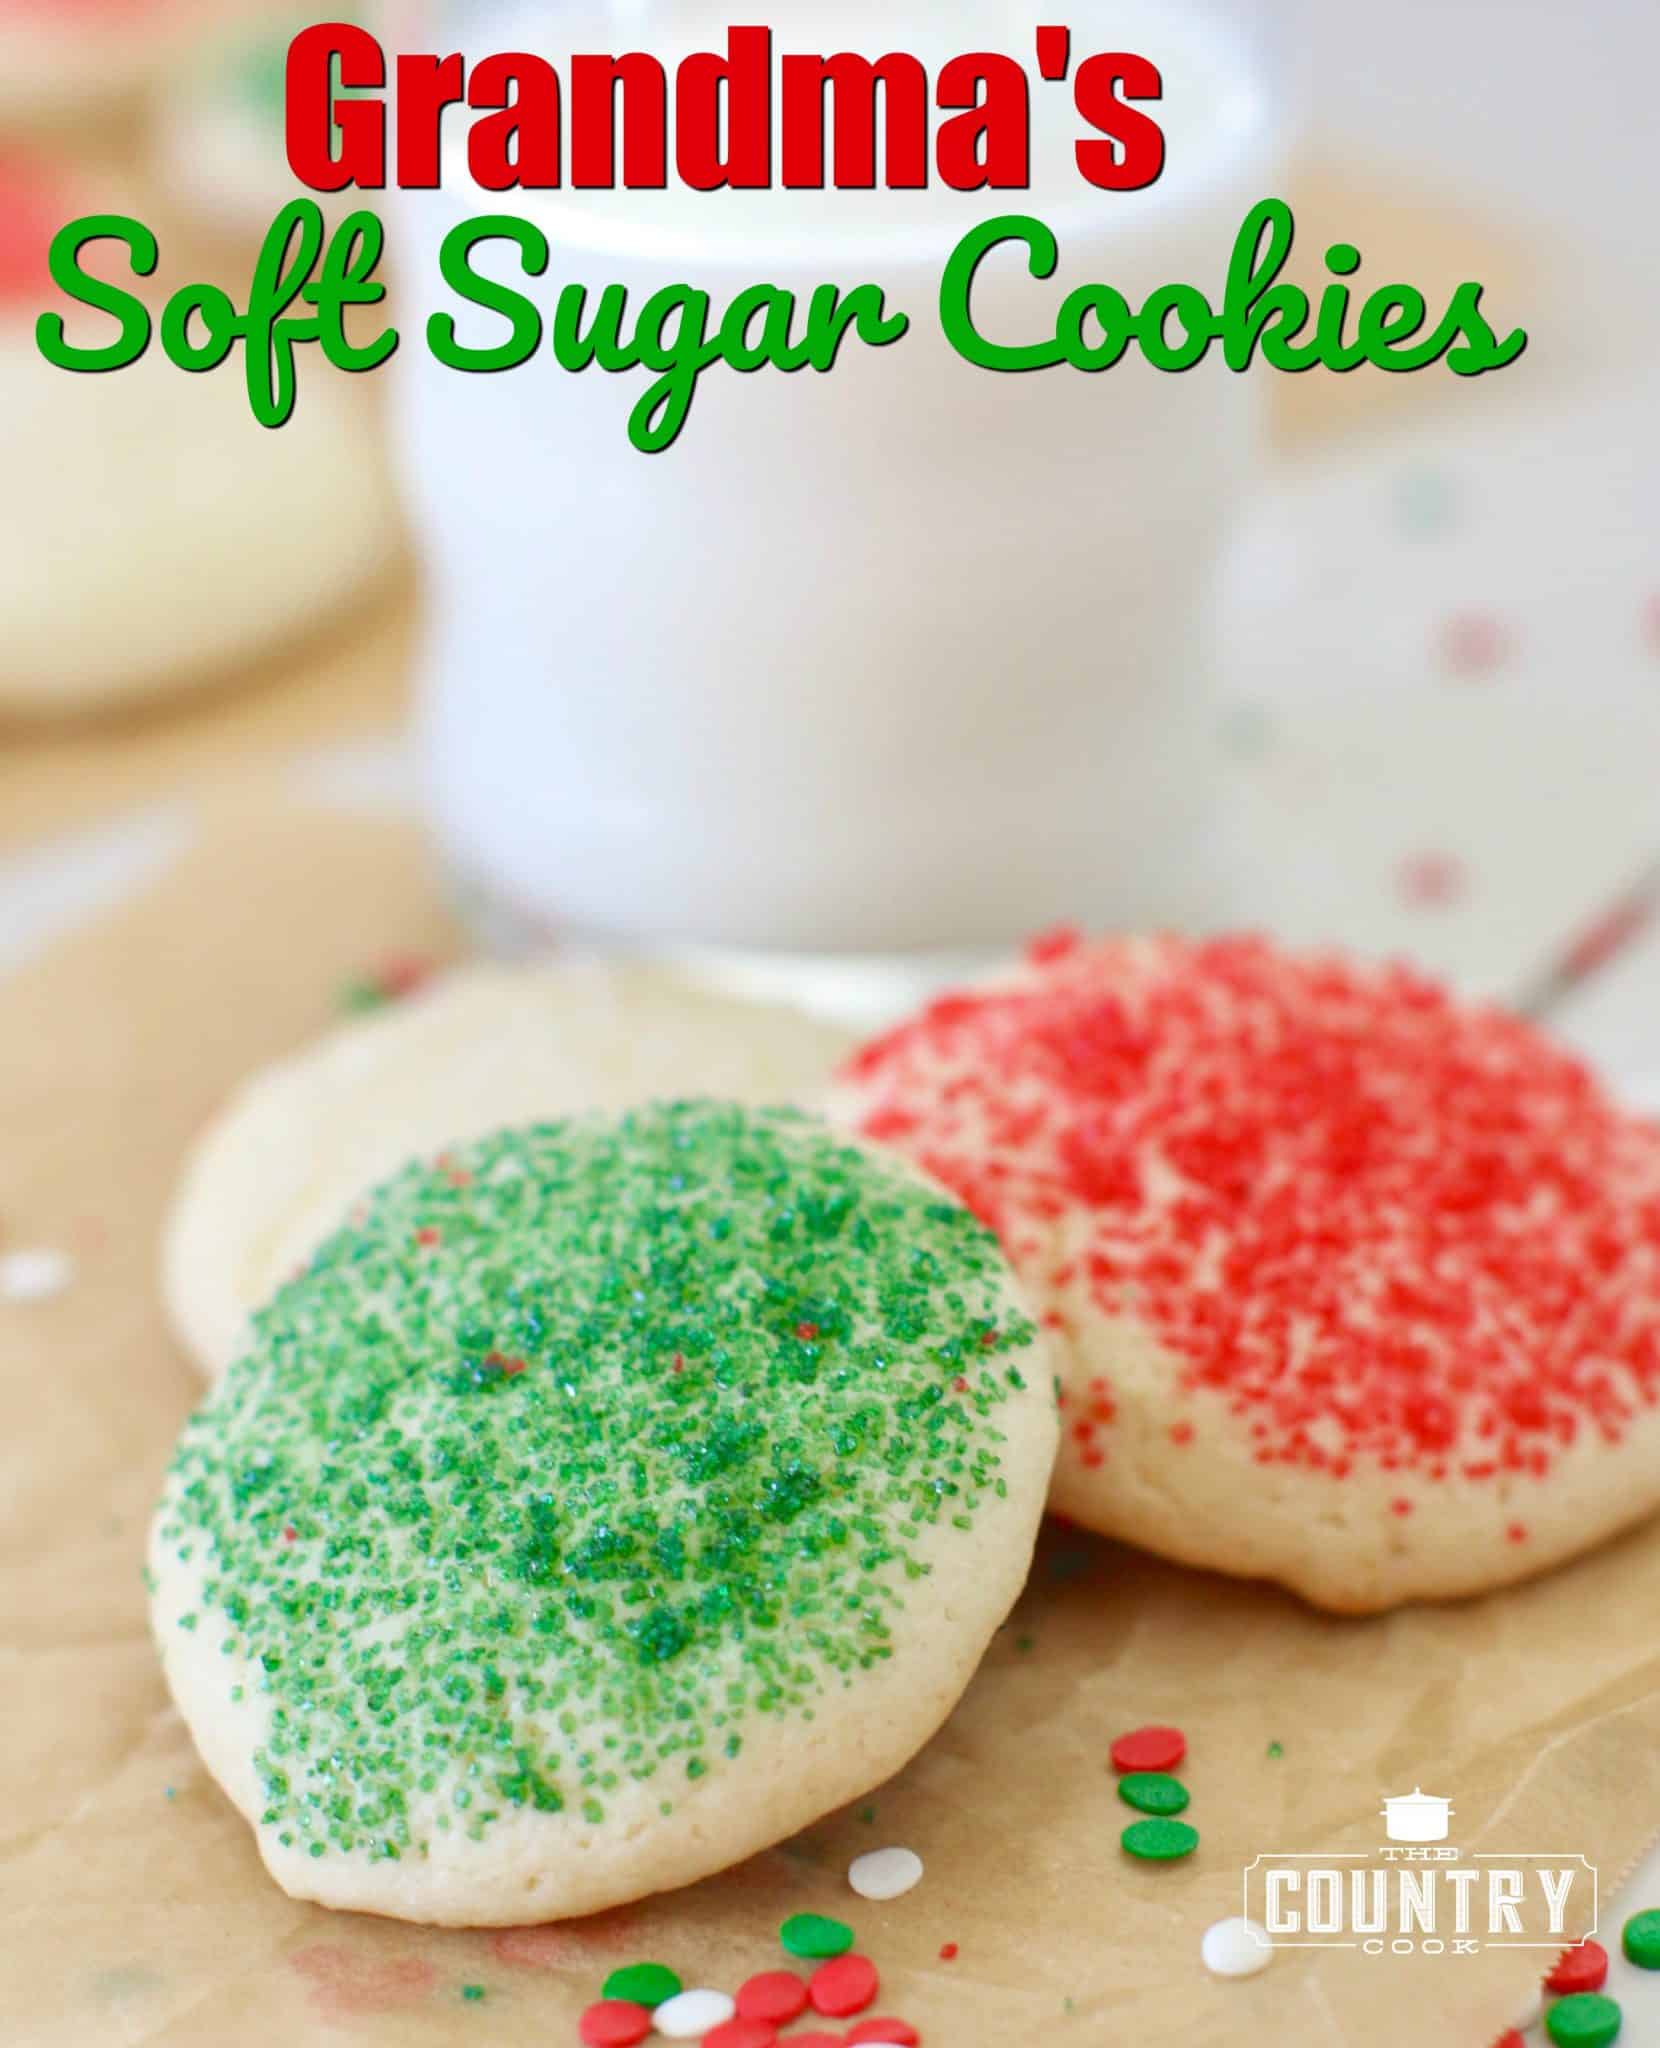 Grandma's Soft Sugar Cookie recipe from The Country Cook.